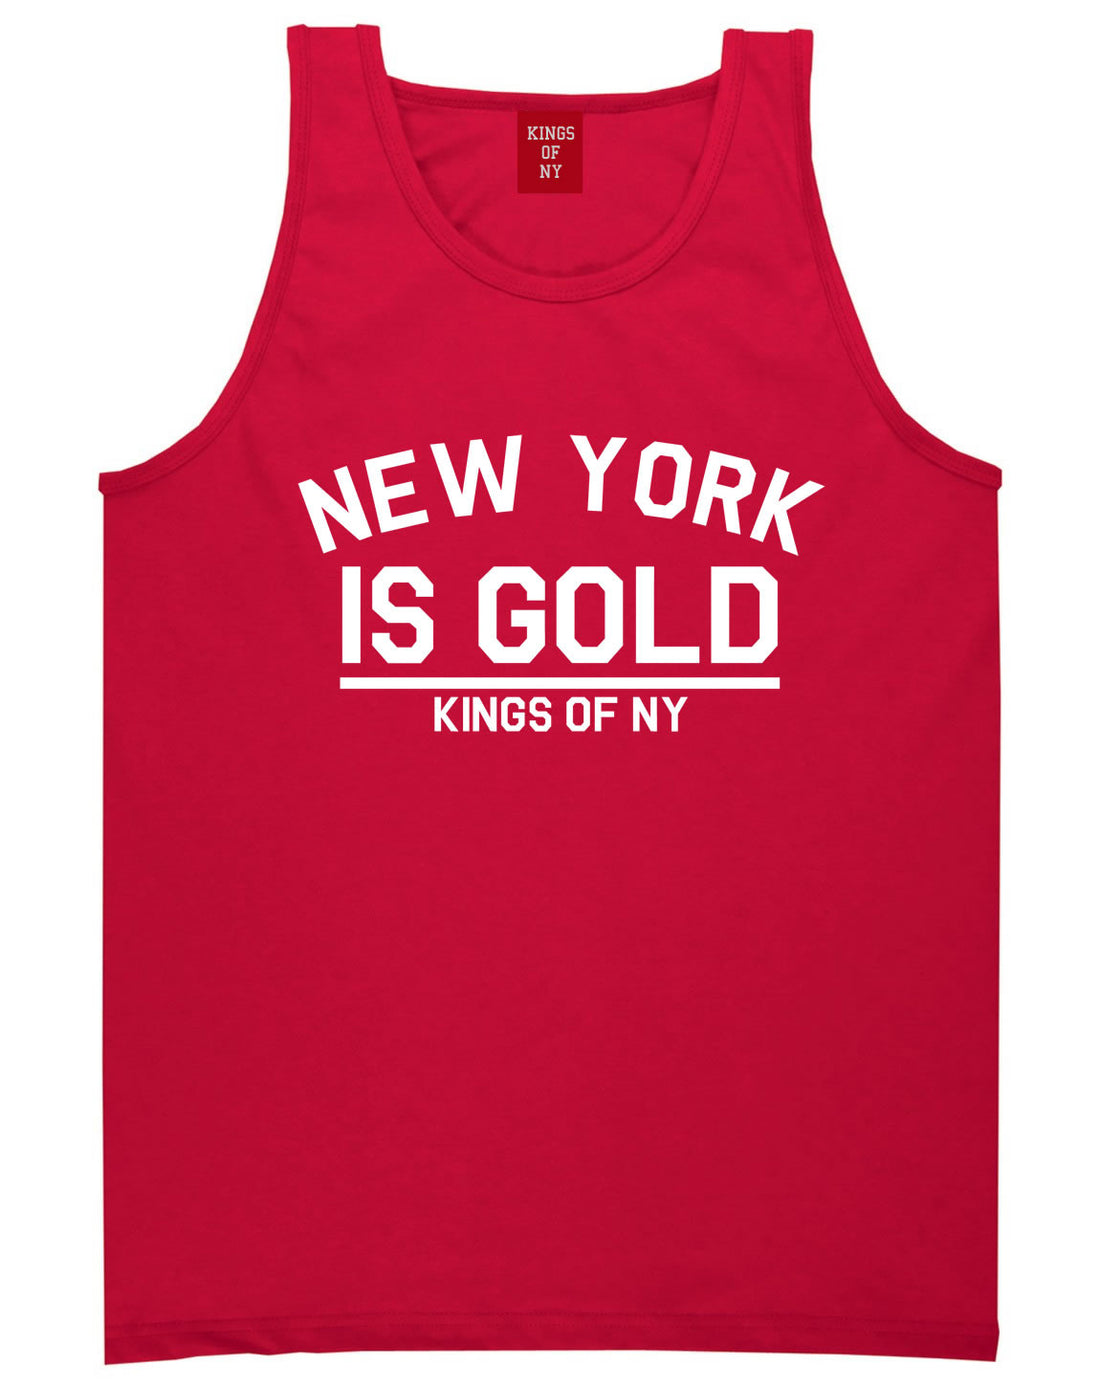 New York Is Gold Tank Top in Red by Kings Of NY